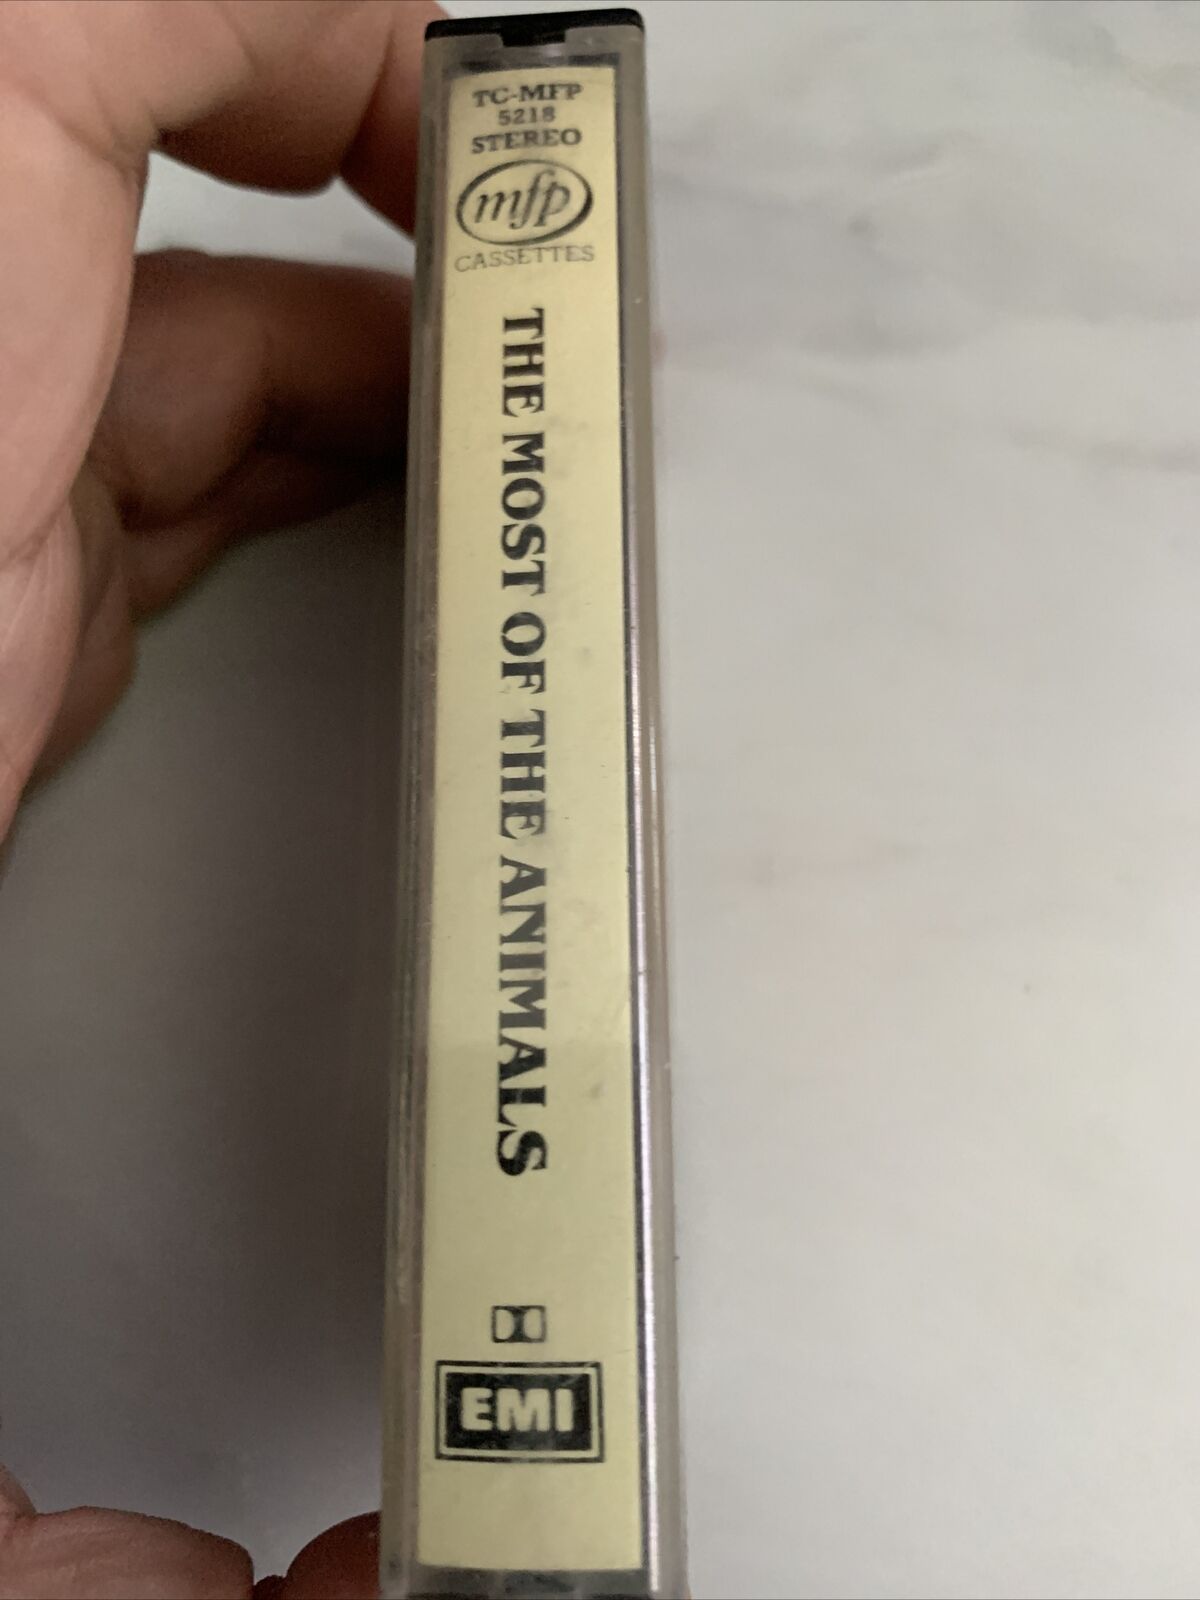 The most of the Animals   cassette